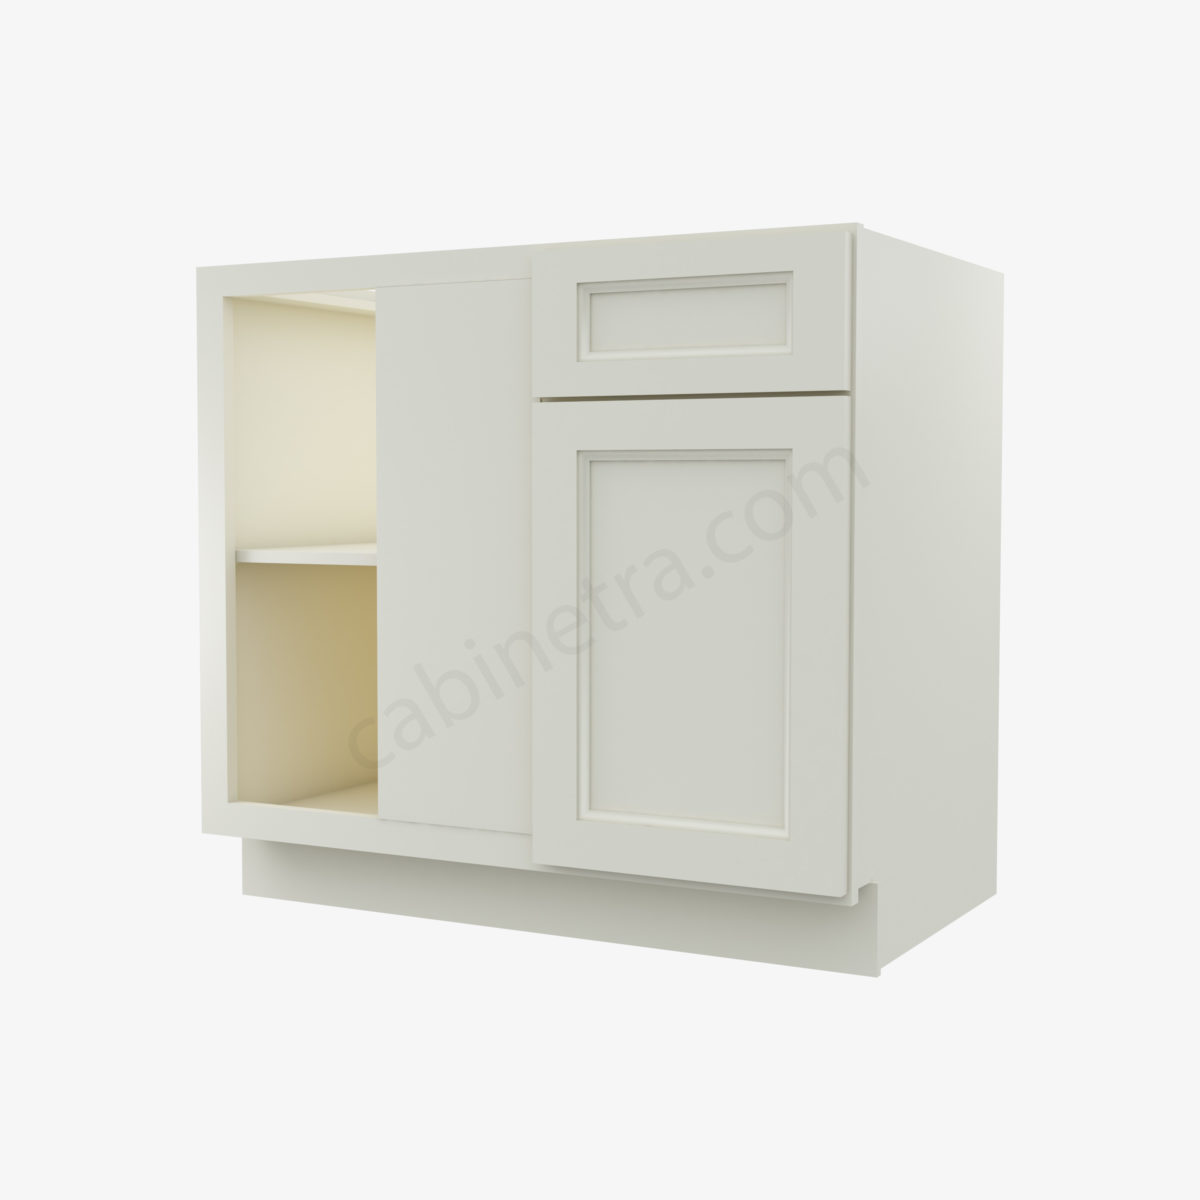 TQ BBLC39 42 36W 0 Forevermark Townplace Crema Cabinetra scaled